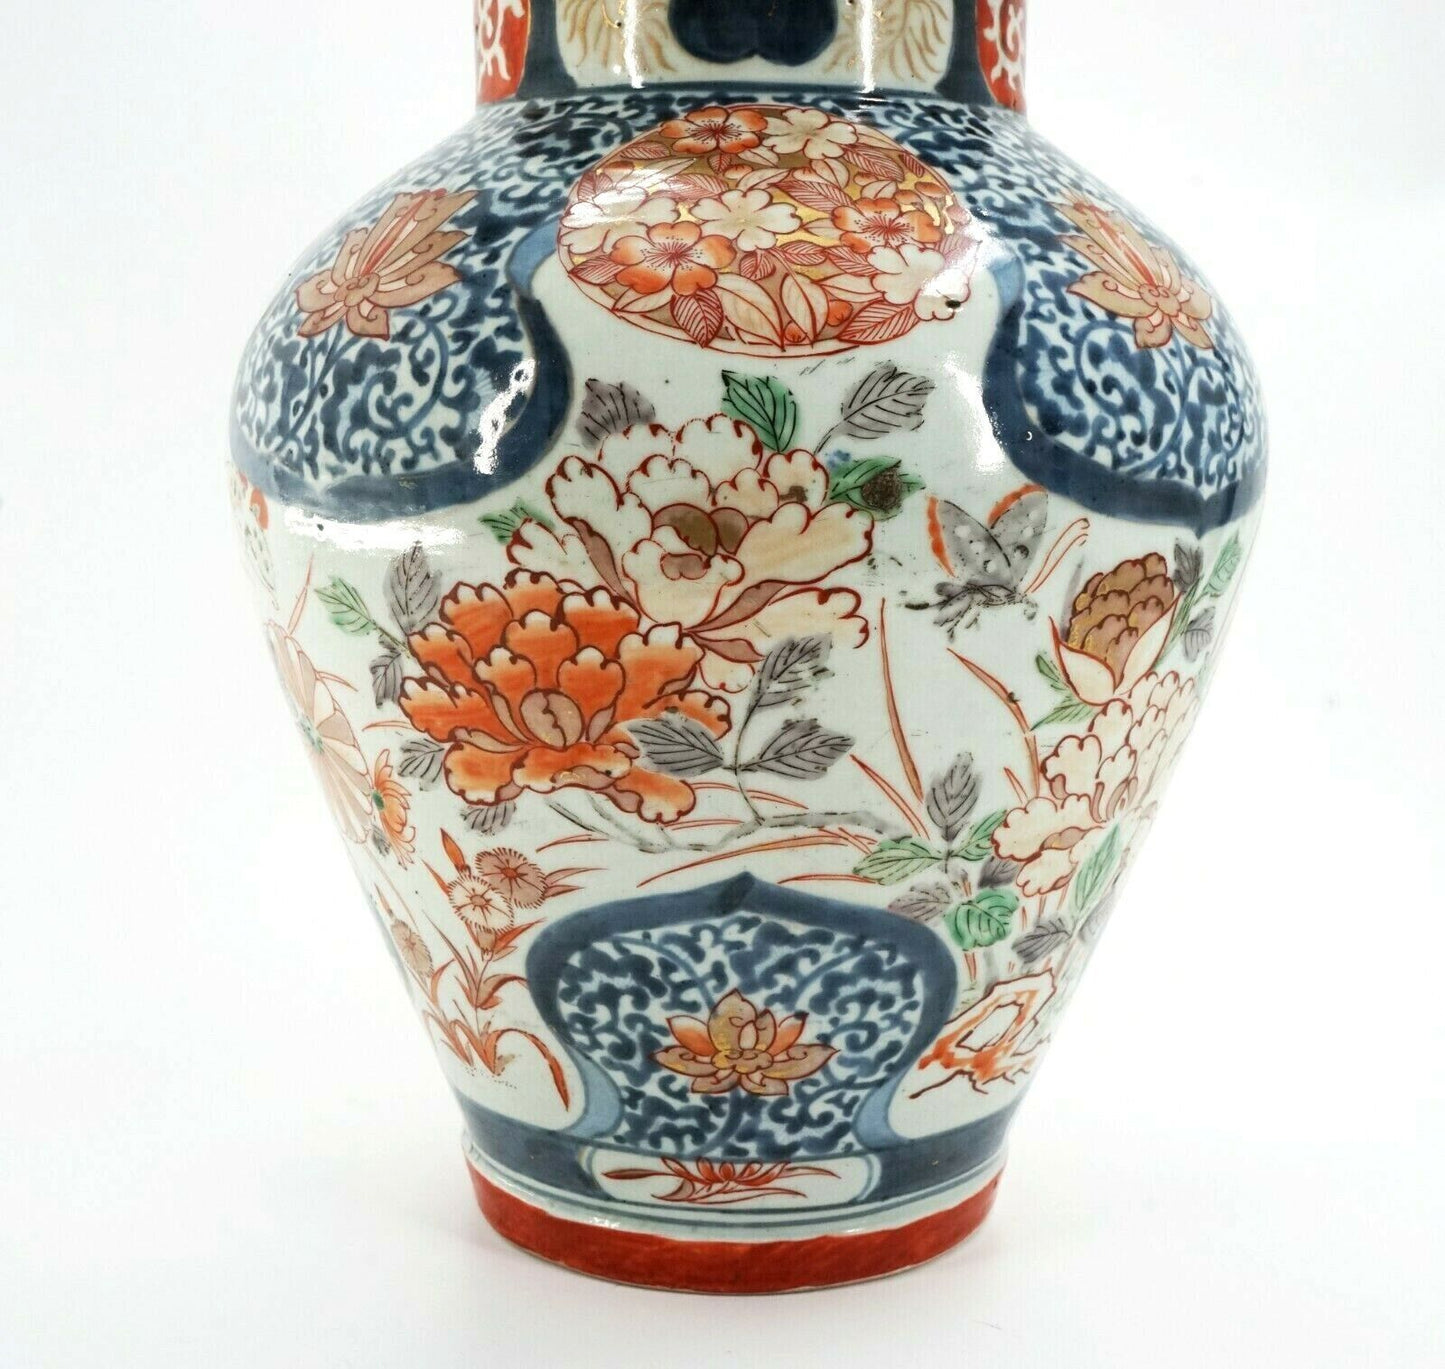 Japanese Imari 18th Century Circa 1700 Covered Baluster Vase 20 Inches in Height